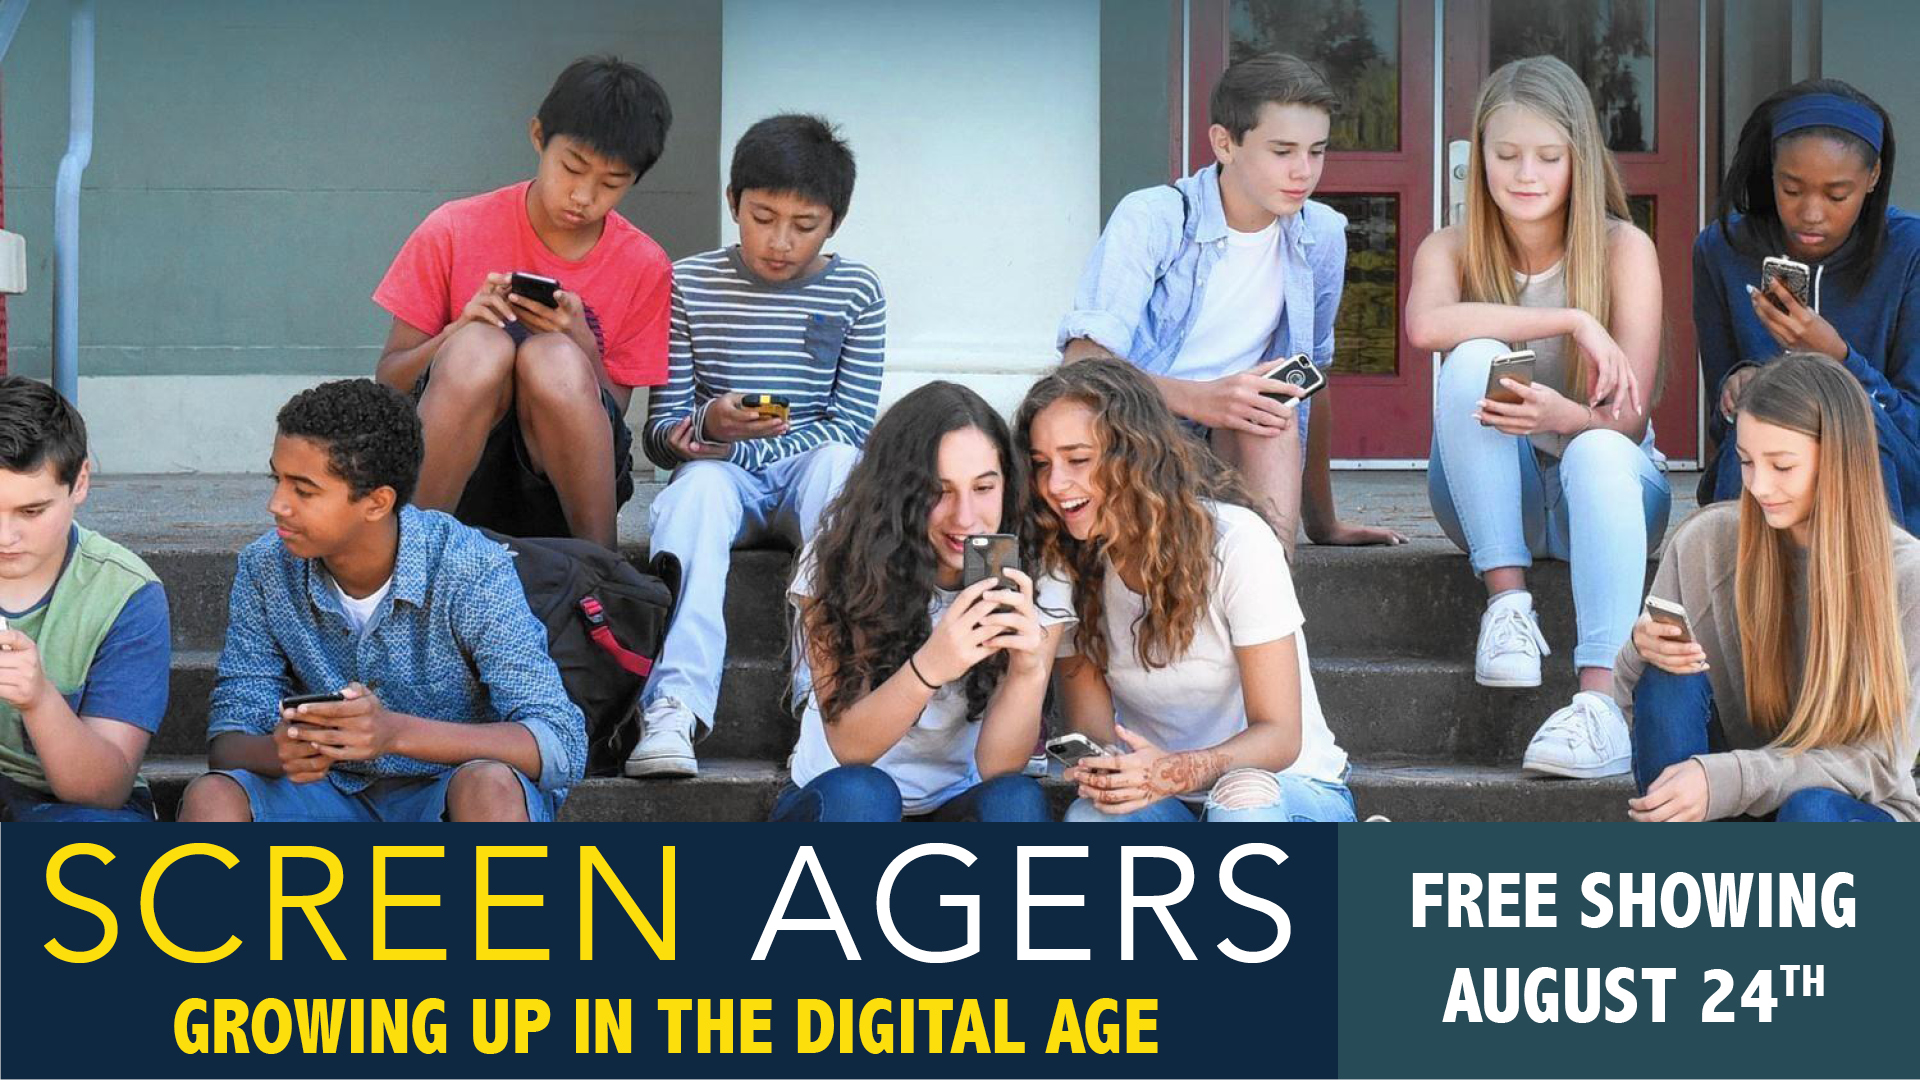 Screenagers Documentary asks the question, How much screen time is too much?